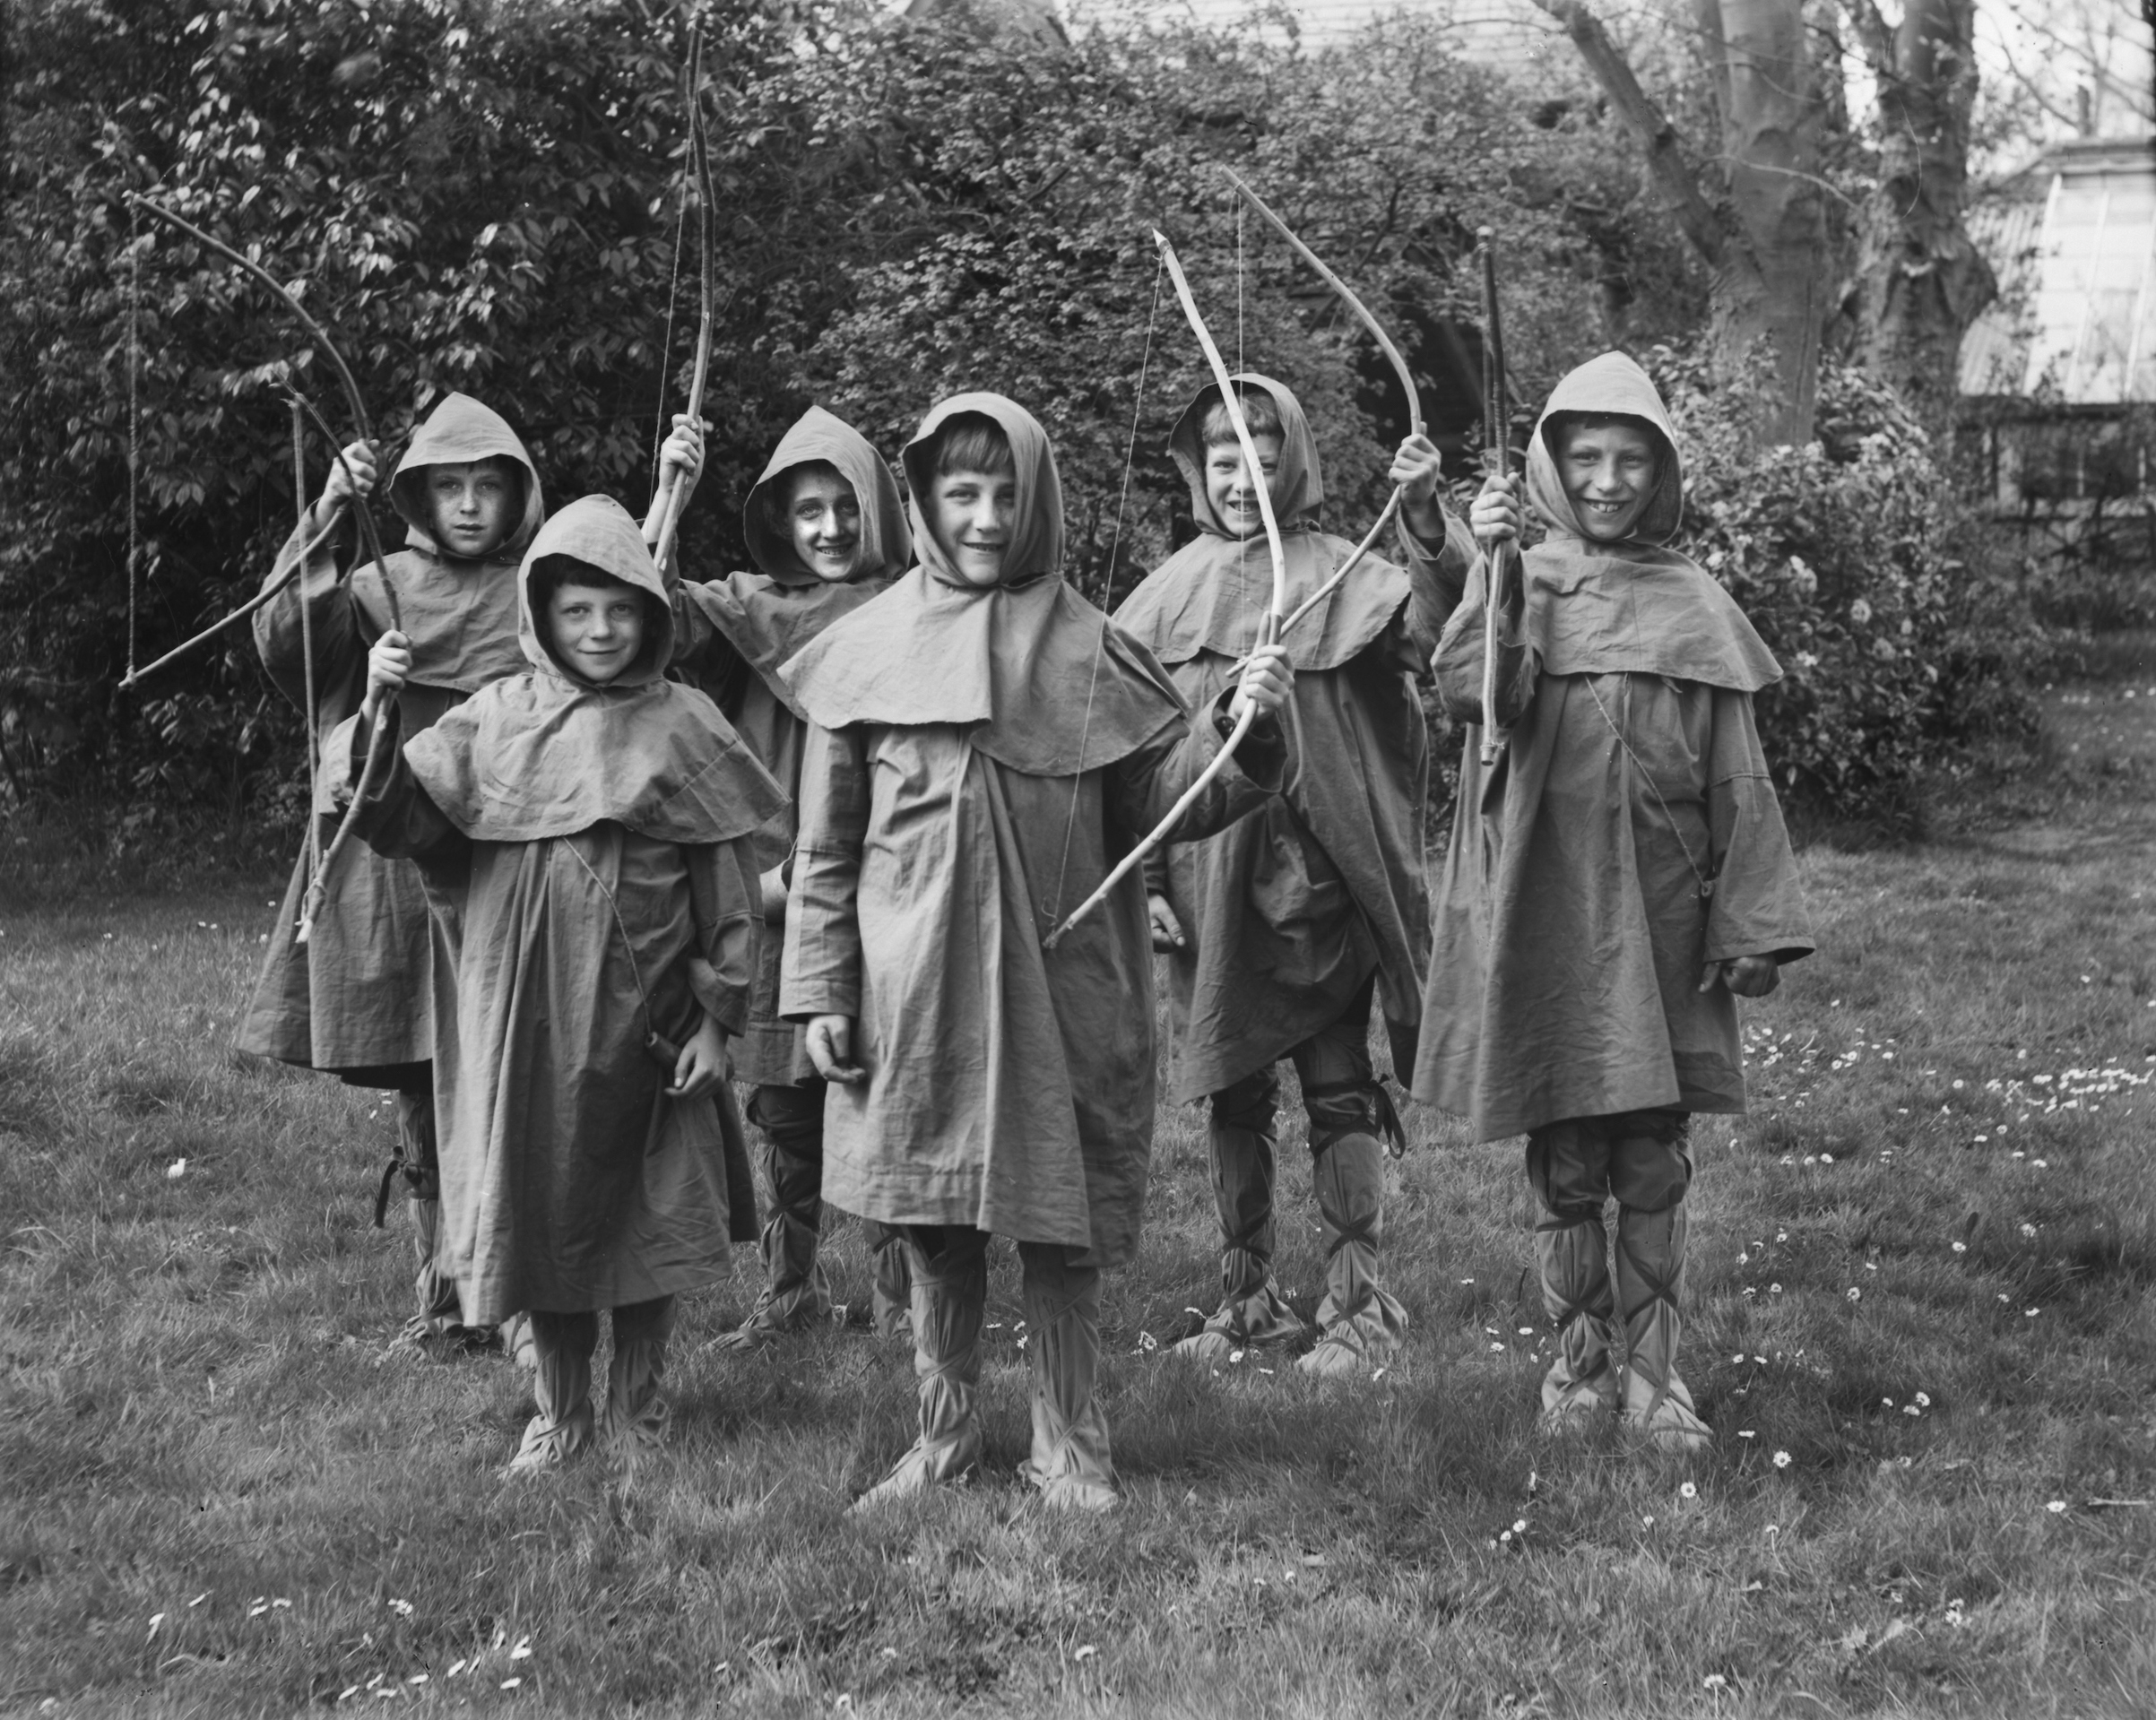 A group of school boys dressed as Robin Hood hold up their bows, U.K. ca. 1920. (Kirn Vintage Stock/Corbis via Getty Images)